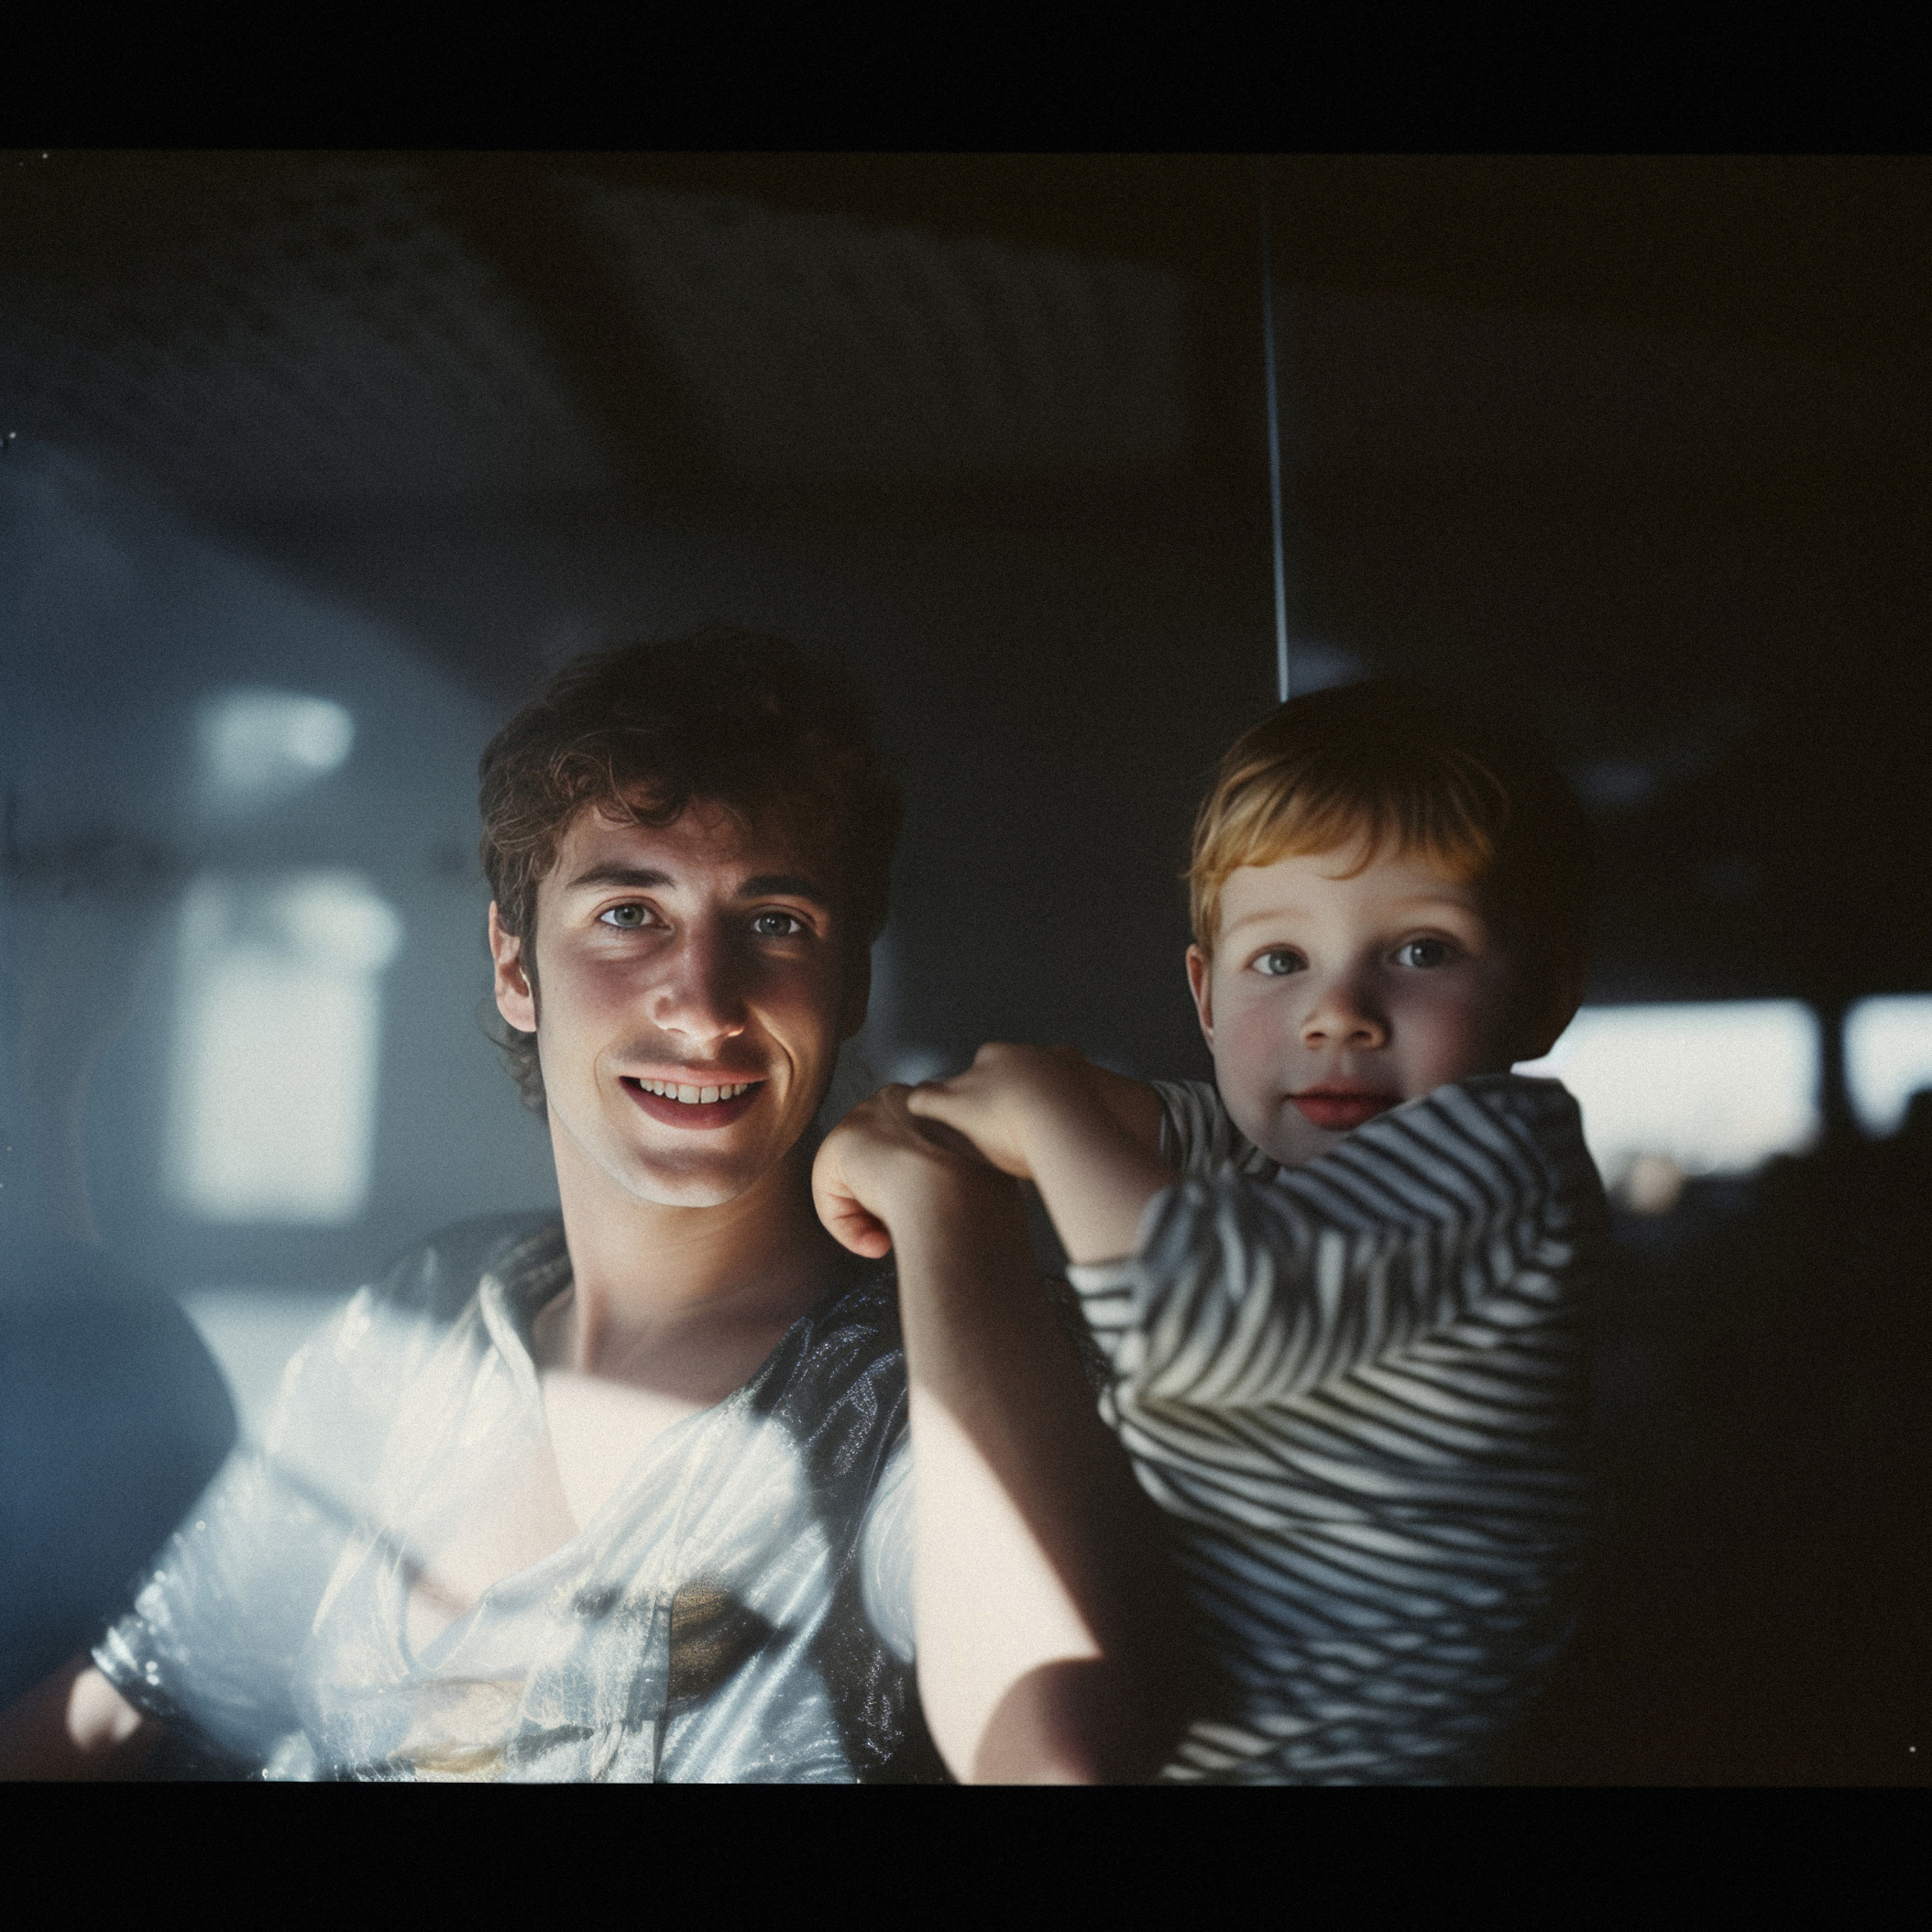 https://s.mj.run/WbuLCo55TbE https://s.mj.run/1Ms5VwWt70w old film with dust and frame, father and son, --style raw-e1VqC9lVMOrD467P --stylize 750 --v 5.2 Job ID: 7a427a90-9bf1-4b17-8eb9-abd6518f5ff5